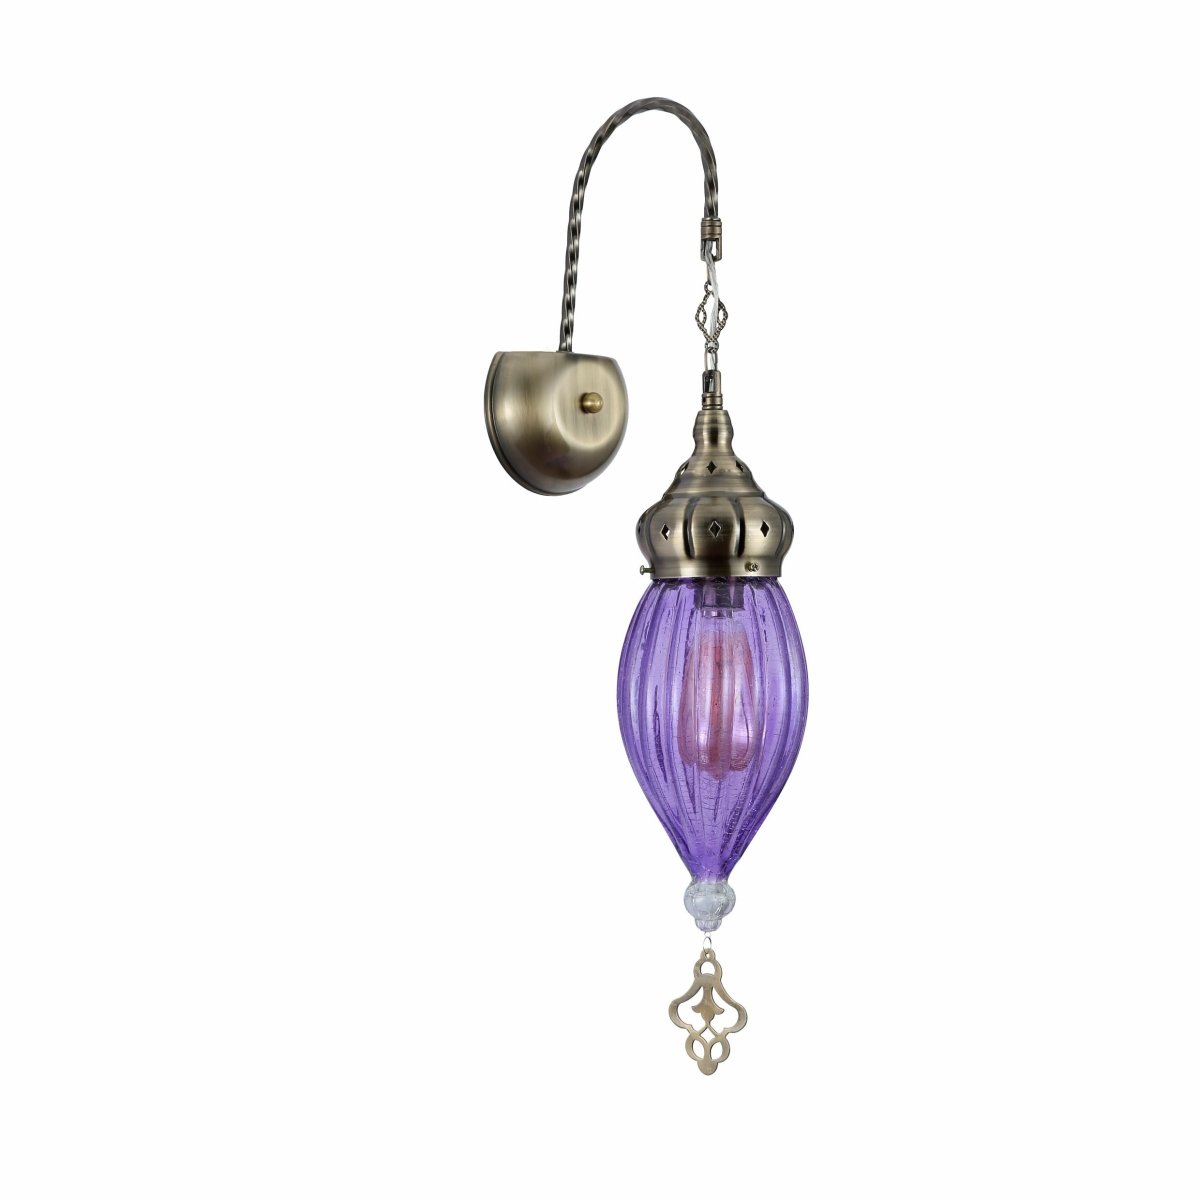 Main image of Purple Glass Antique Bronze Metal Body Moroccan Style Wall Light with E27 Fitting | TEKLED 151-194583